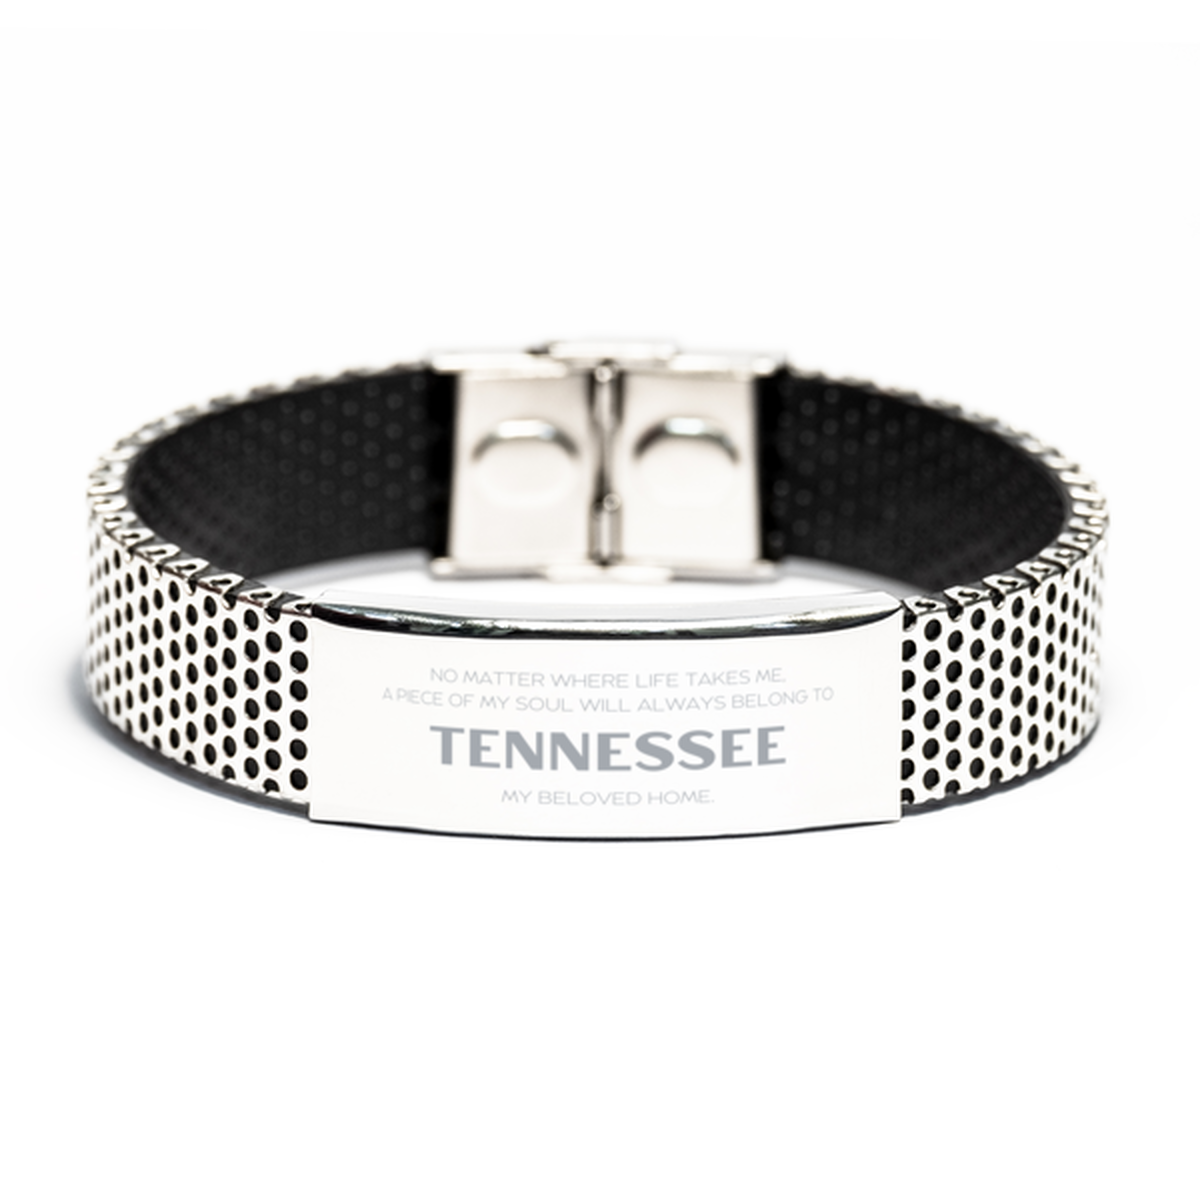 Love Tennessee State Gifts, My soul will always belong to Tennessee, Proud Stainless Steel Bracelet, Birthday Unique Gifts For Tennessee Men, Women, Friends